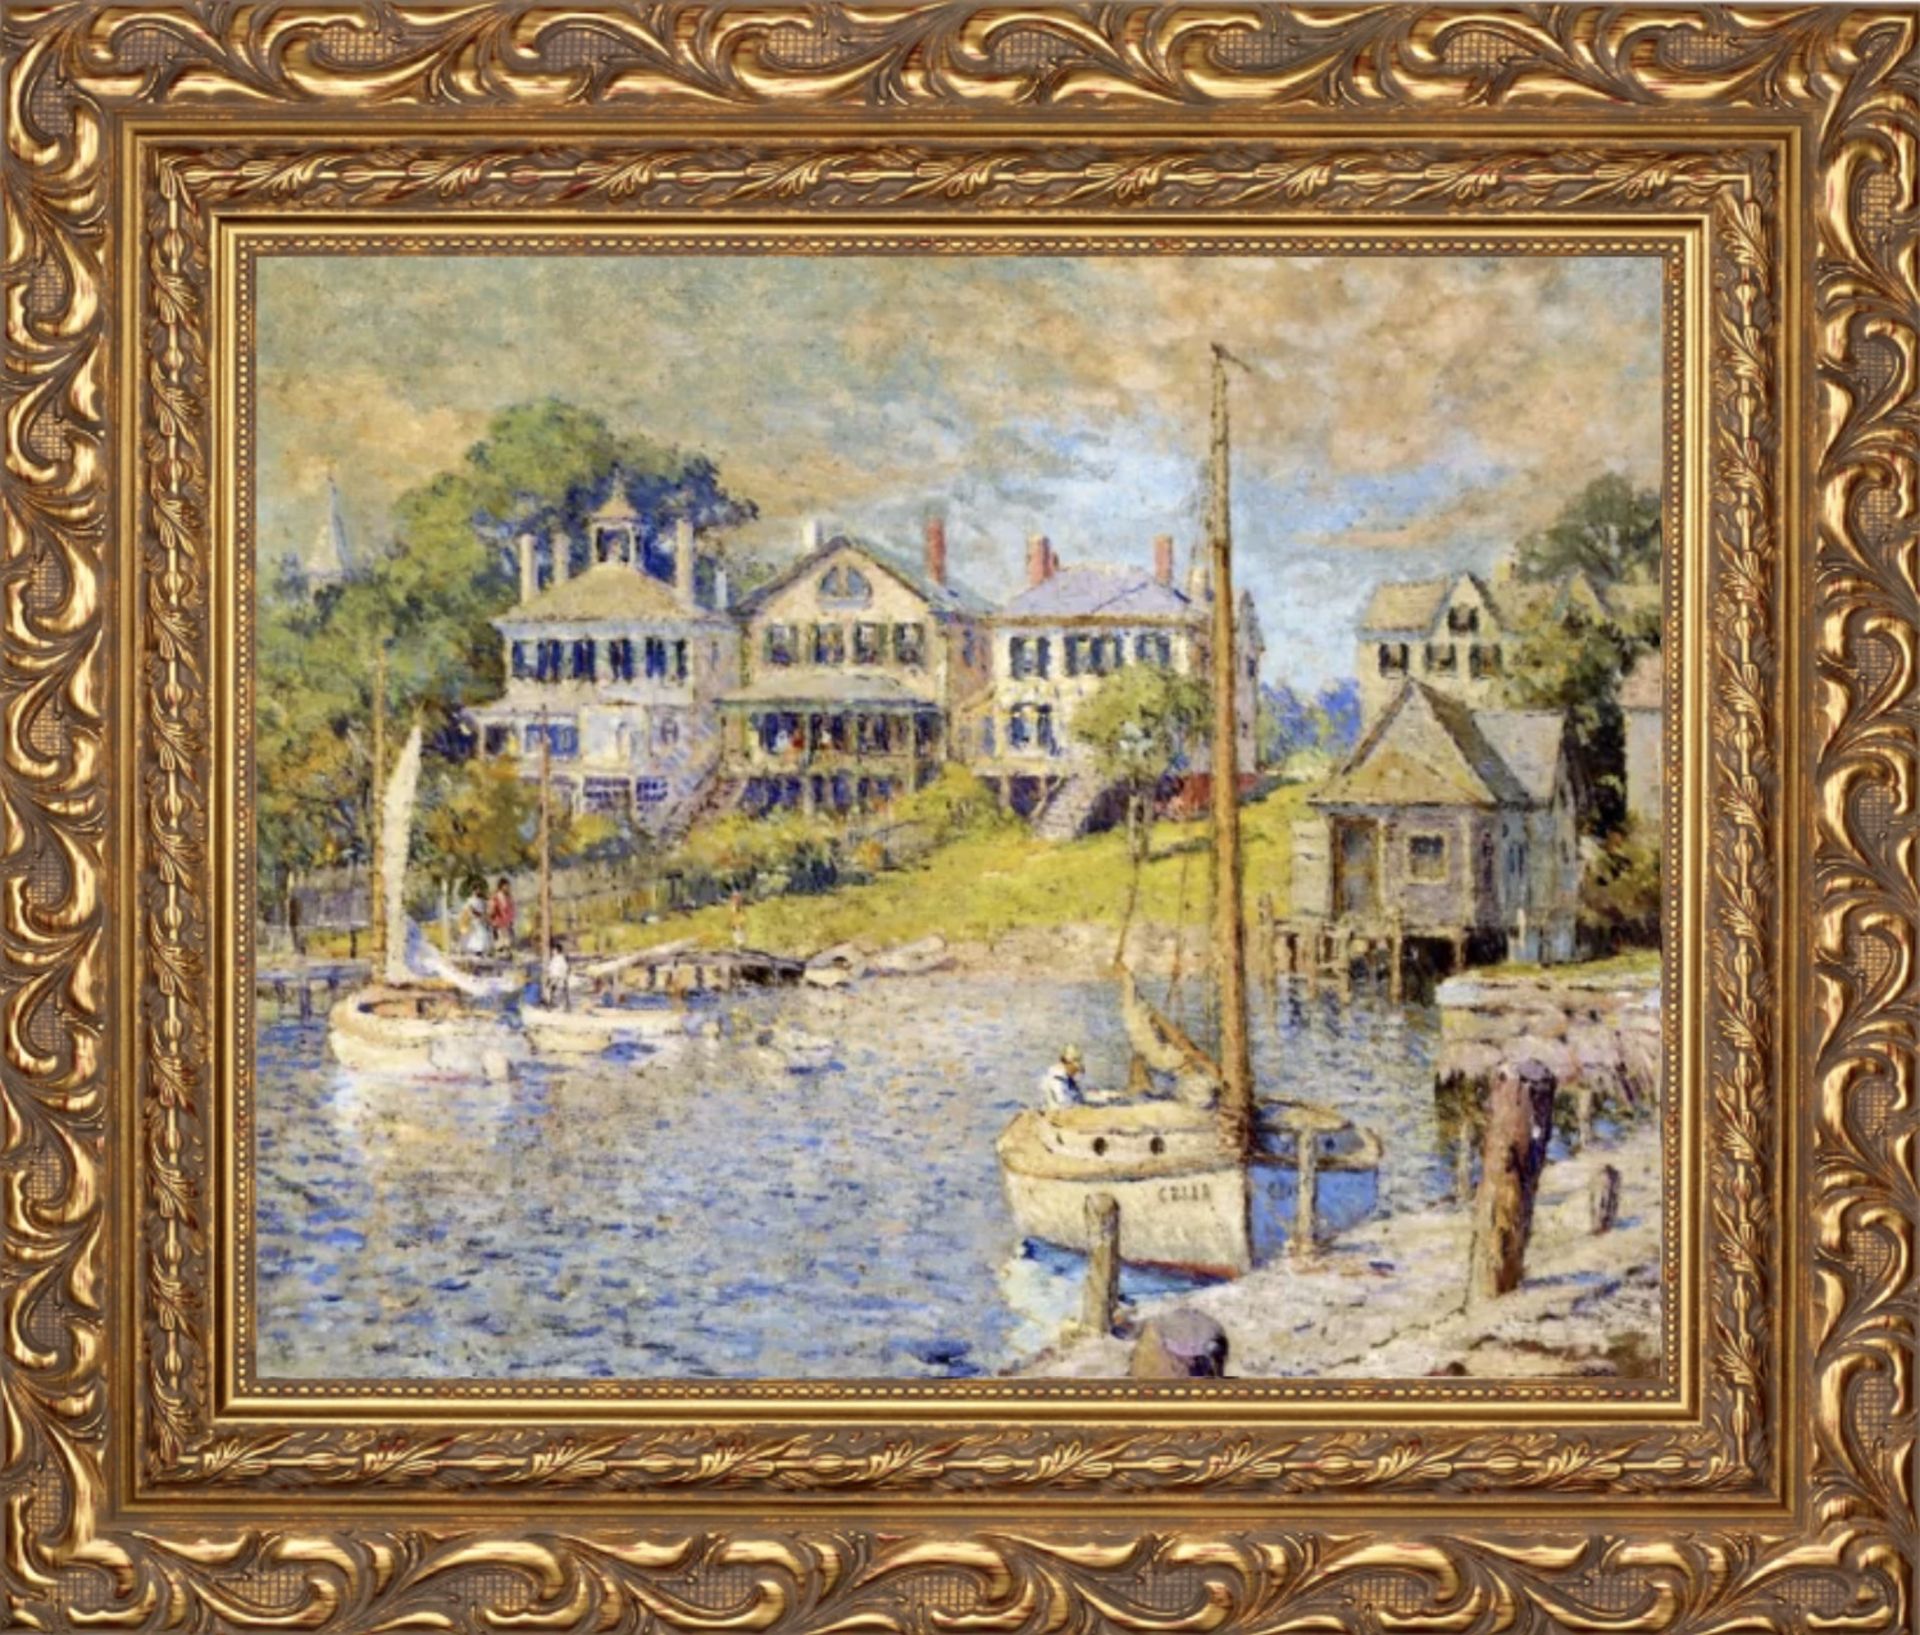 Colin Campbell Cooper "At Edgartown, Marthas Vinyard" Oil Painting